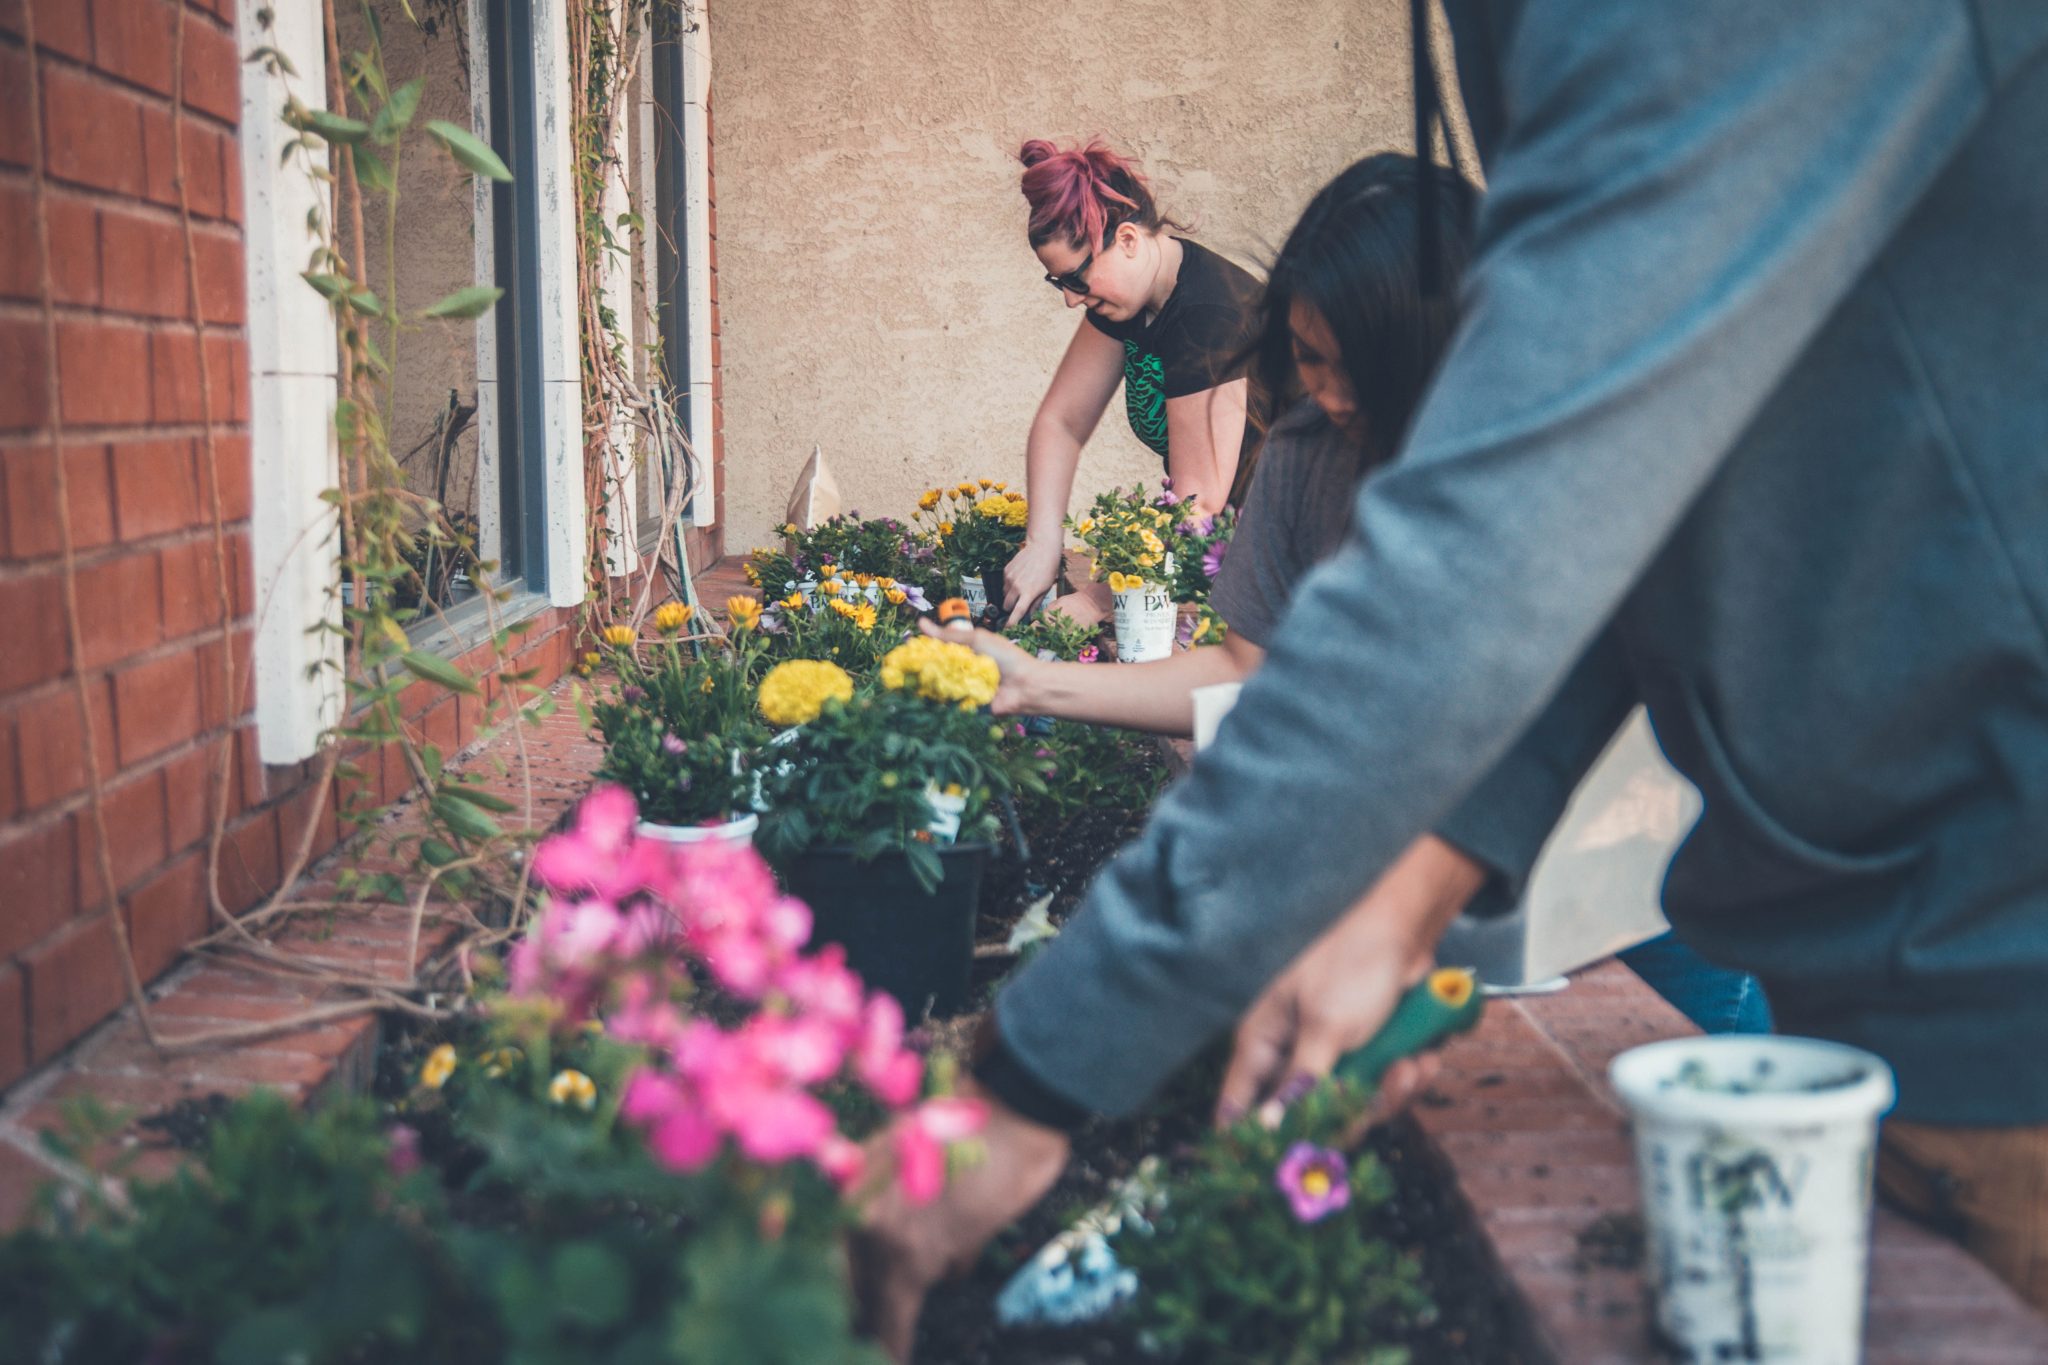 People gardening and potting some flowers outdoors.